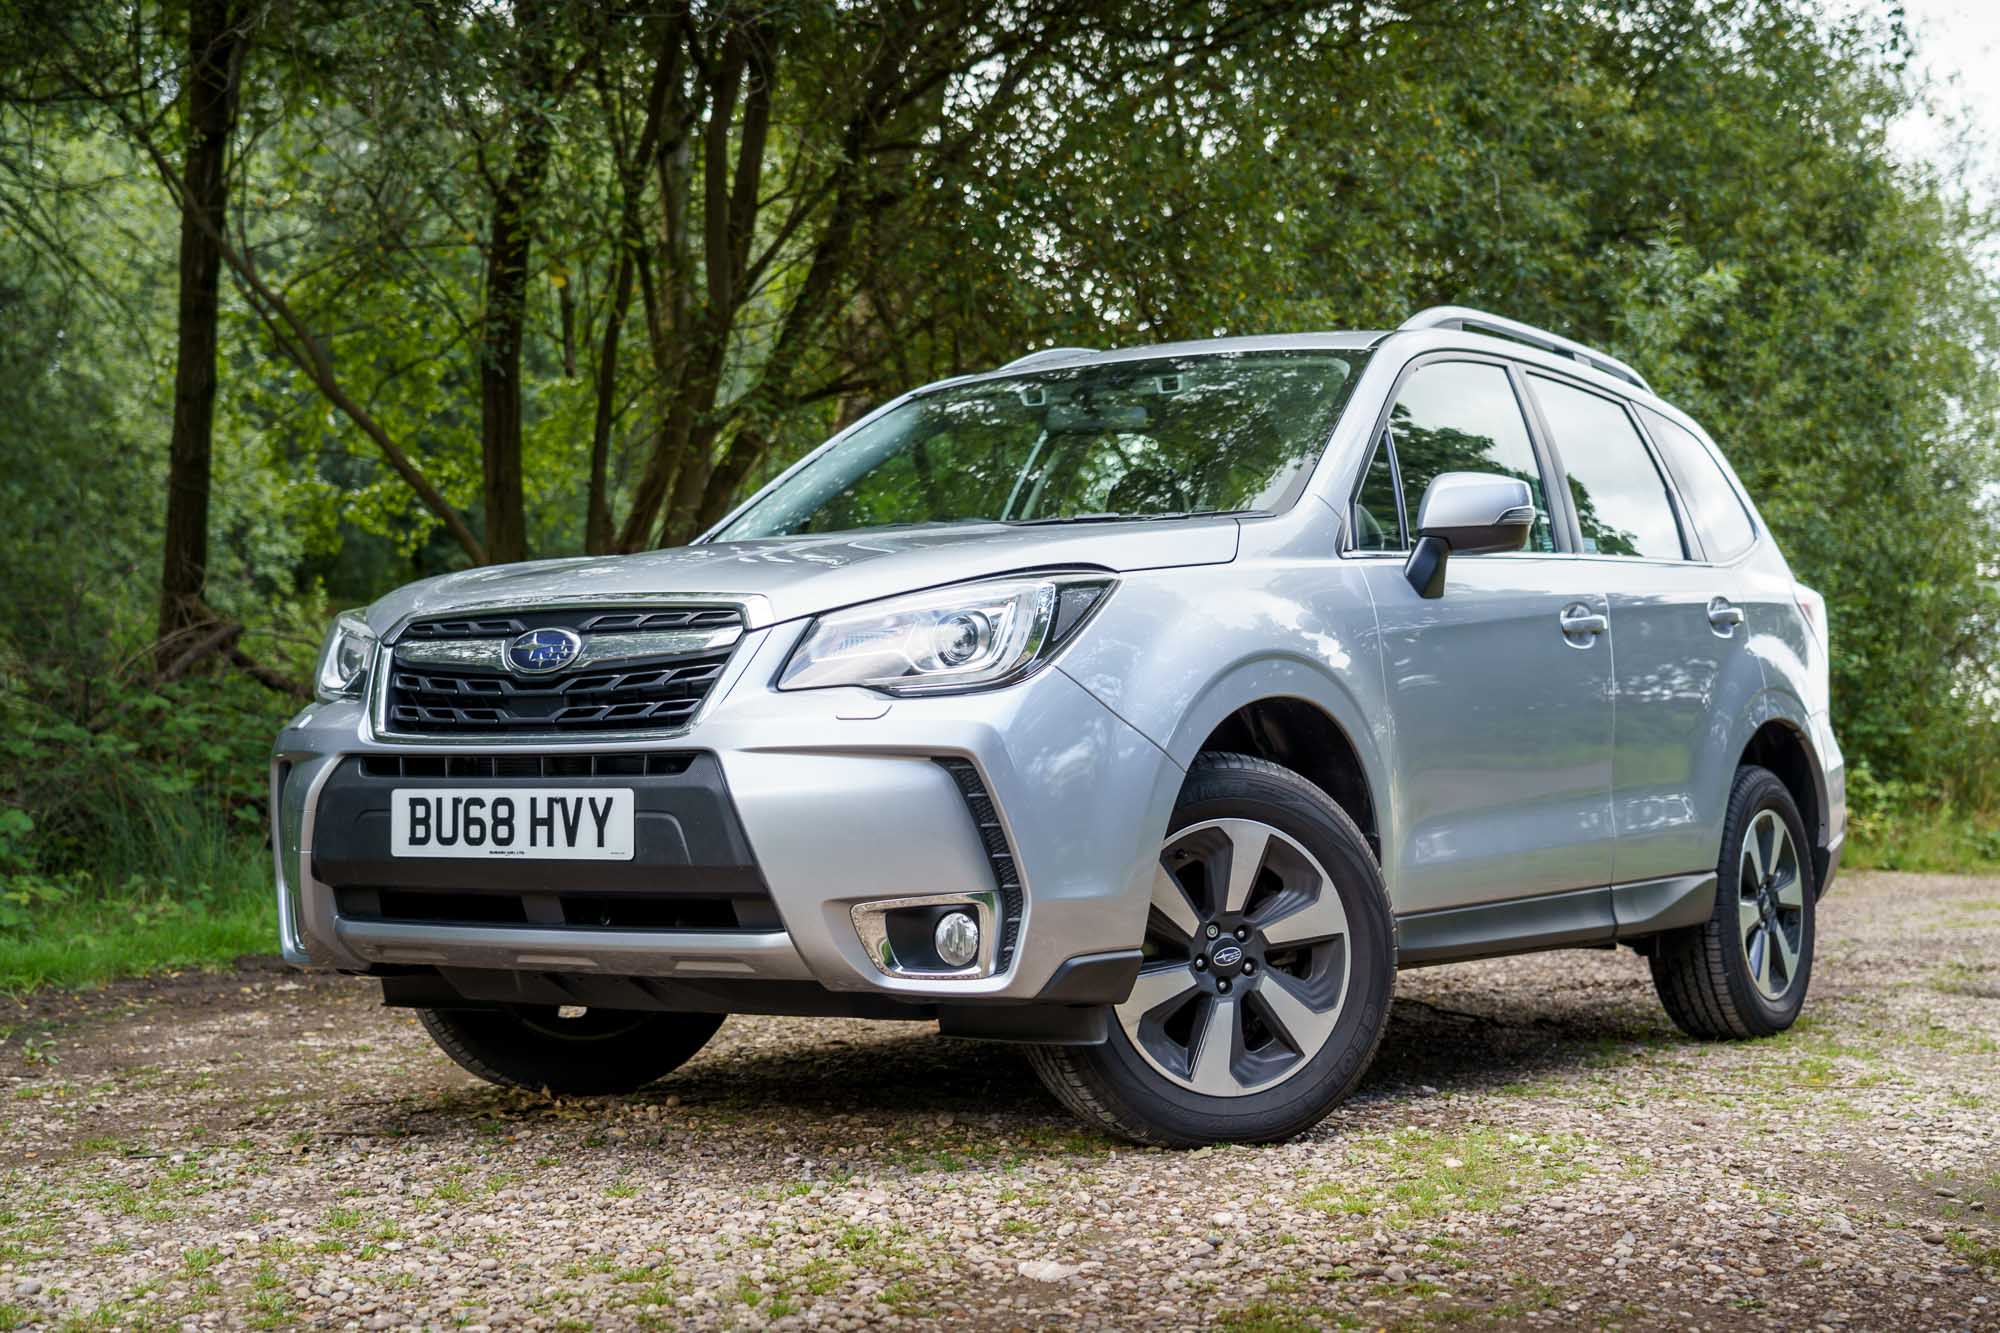 Subaru Forester Problems Most Common Issues, And Reliability